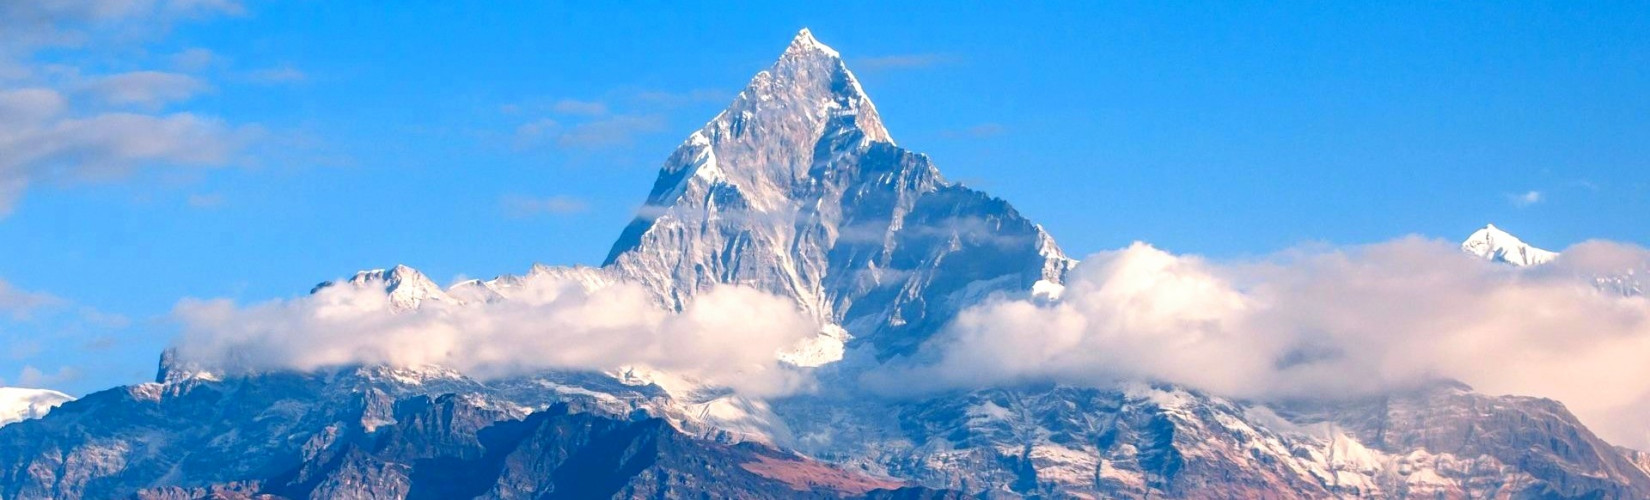 10 Most Interesting Facts about Mount Everest